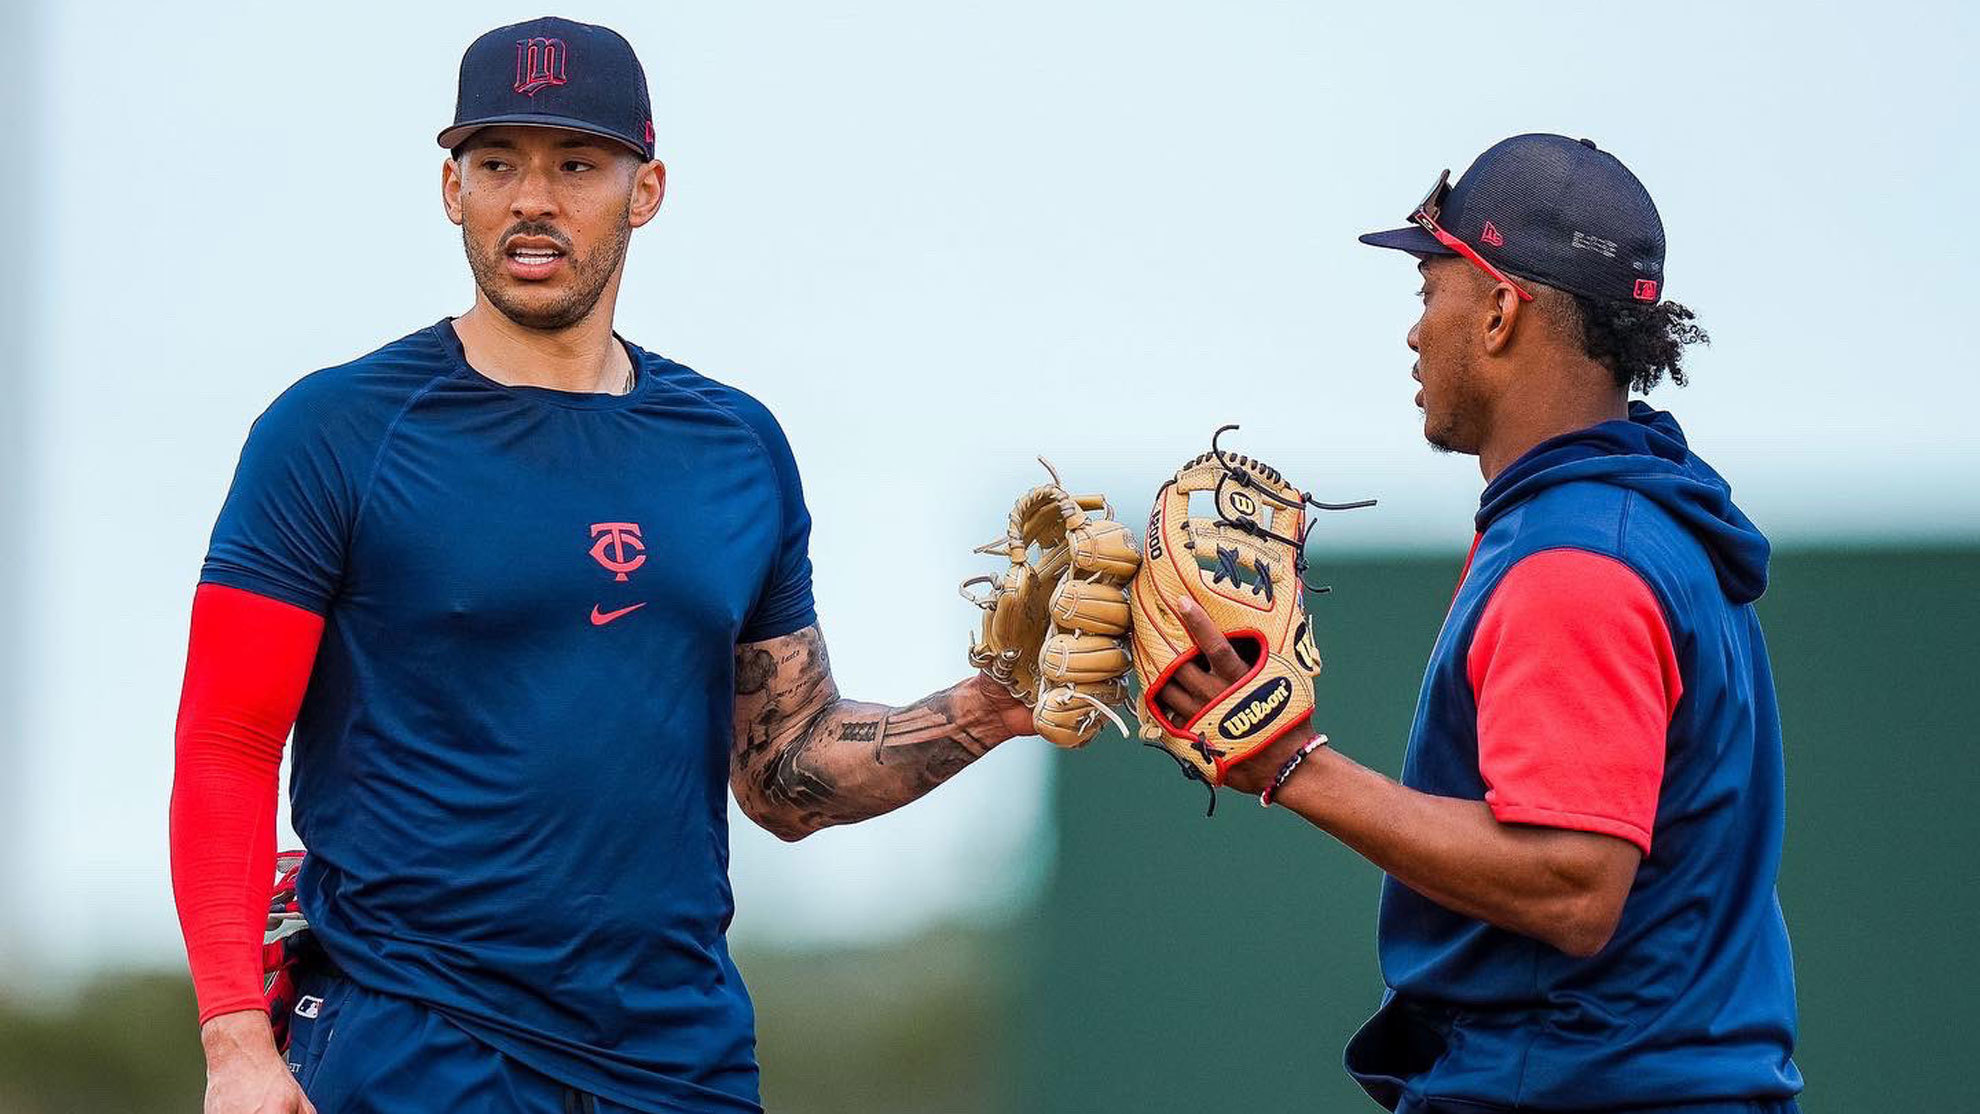 Carlos Correa commands the new Latin power in the Twins.